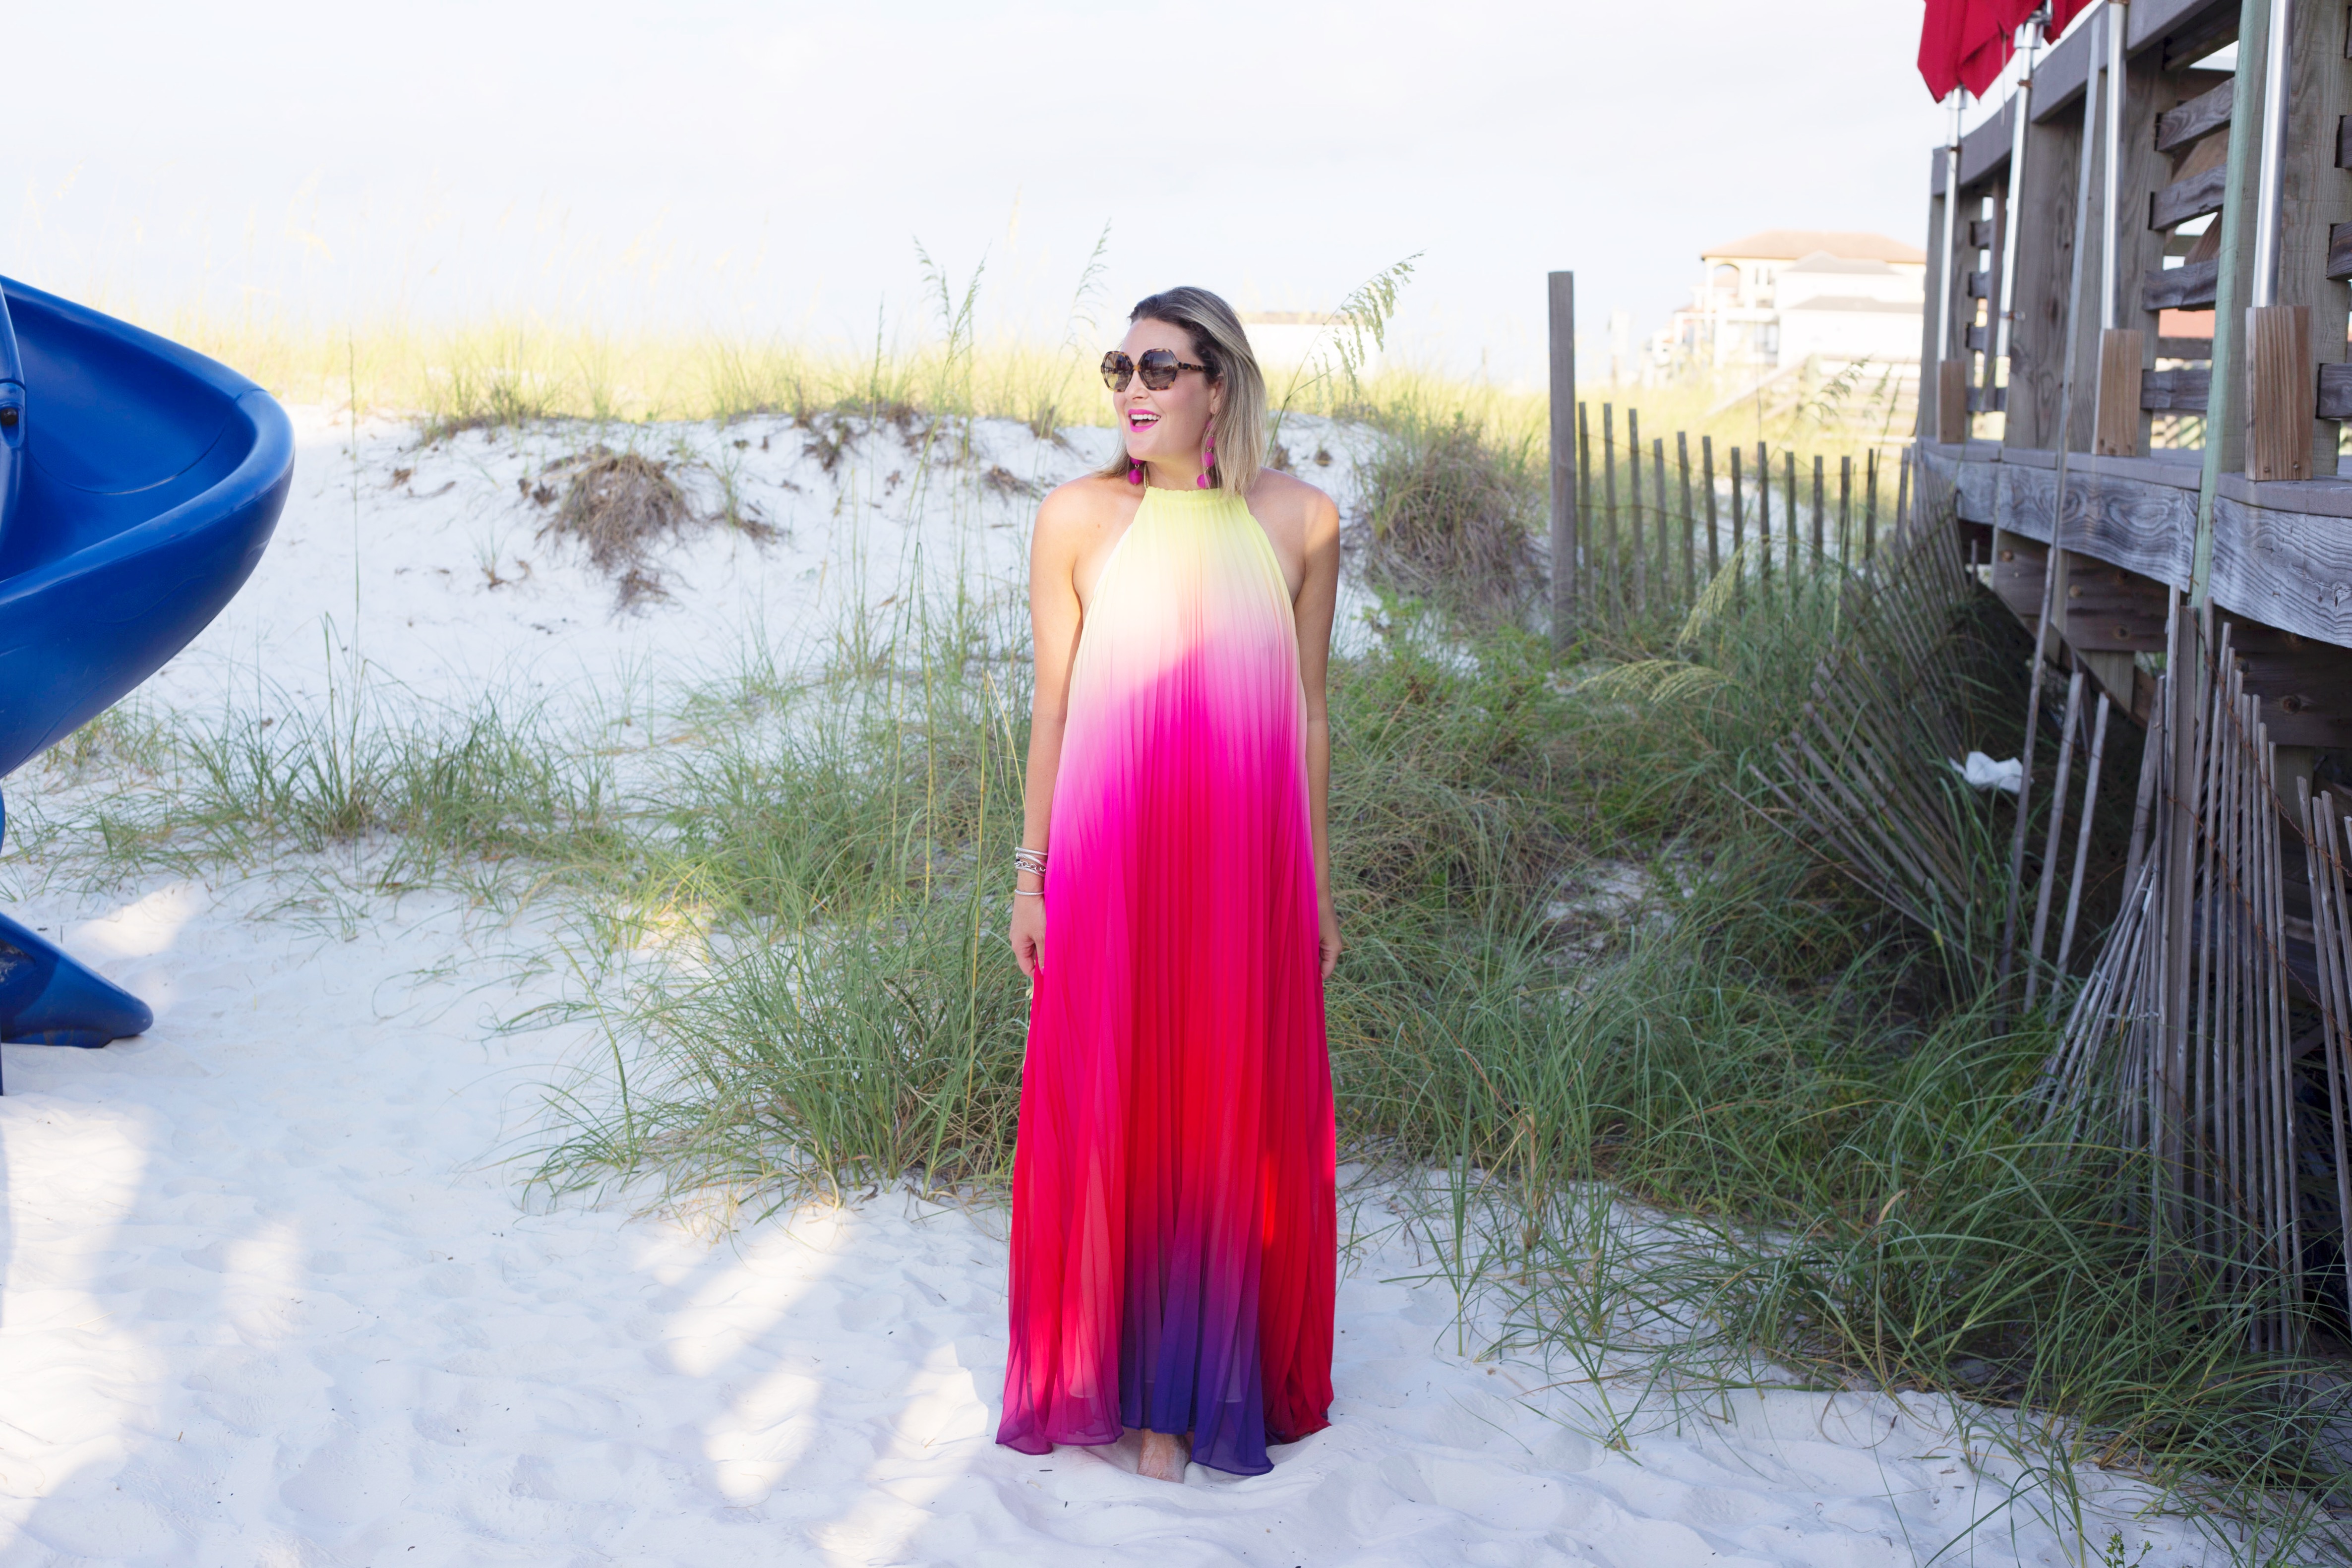 Florida lifestyle blogger, MikaelaJ, shares a gorgeous rainbow maxi dress in this new edition of What I'm Wearing Wednesday!